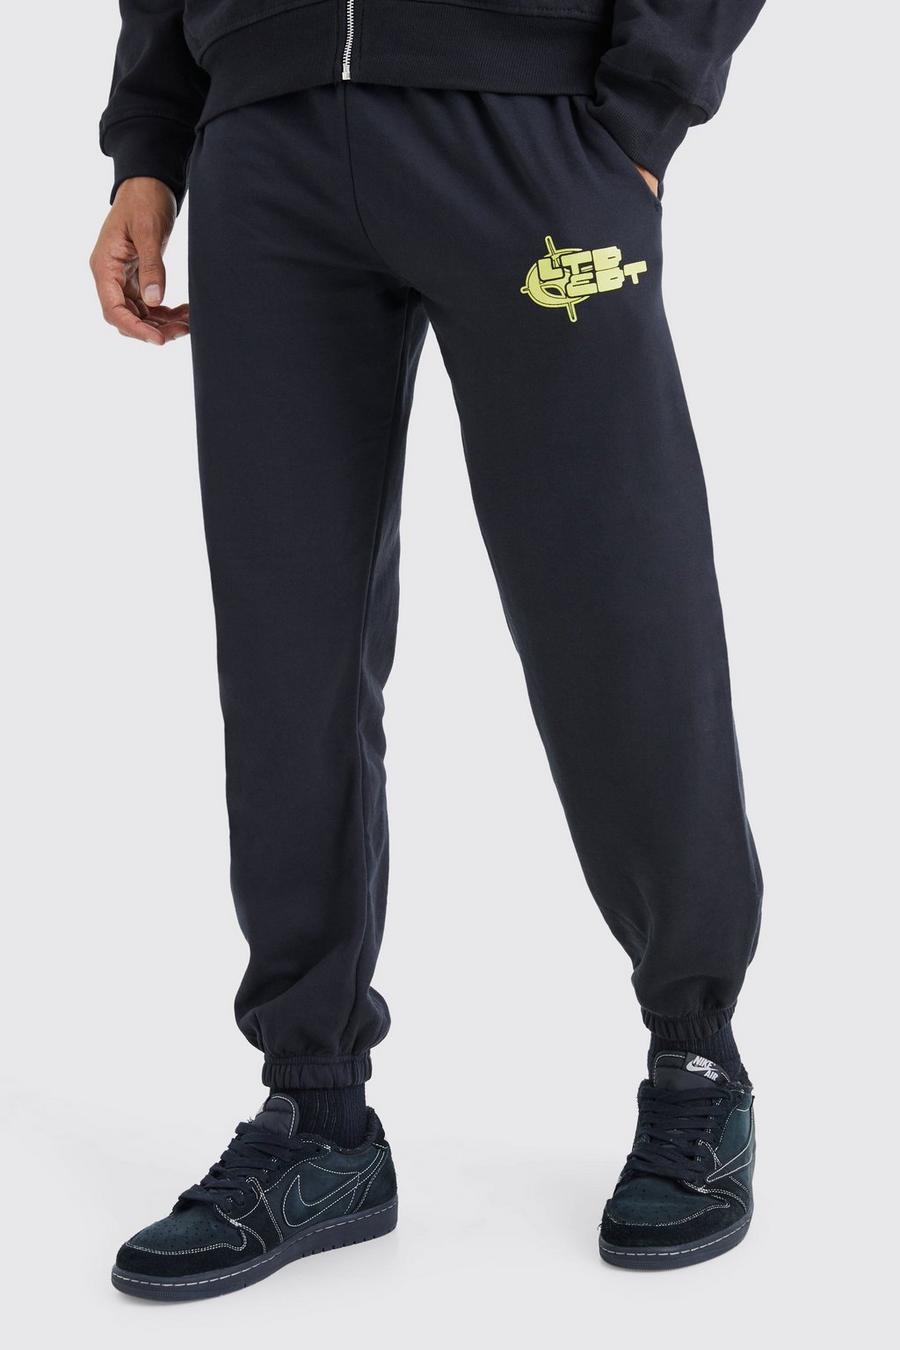 Black Limited Edition Jogger